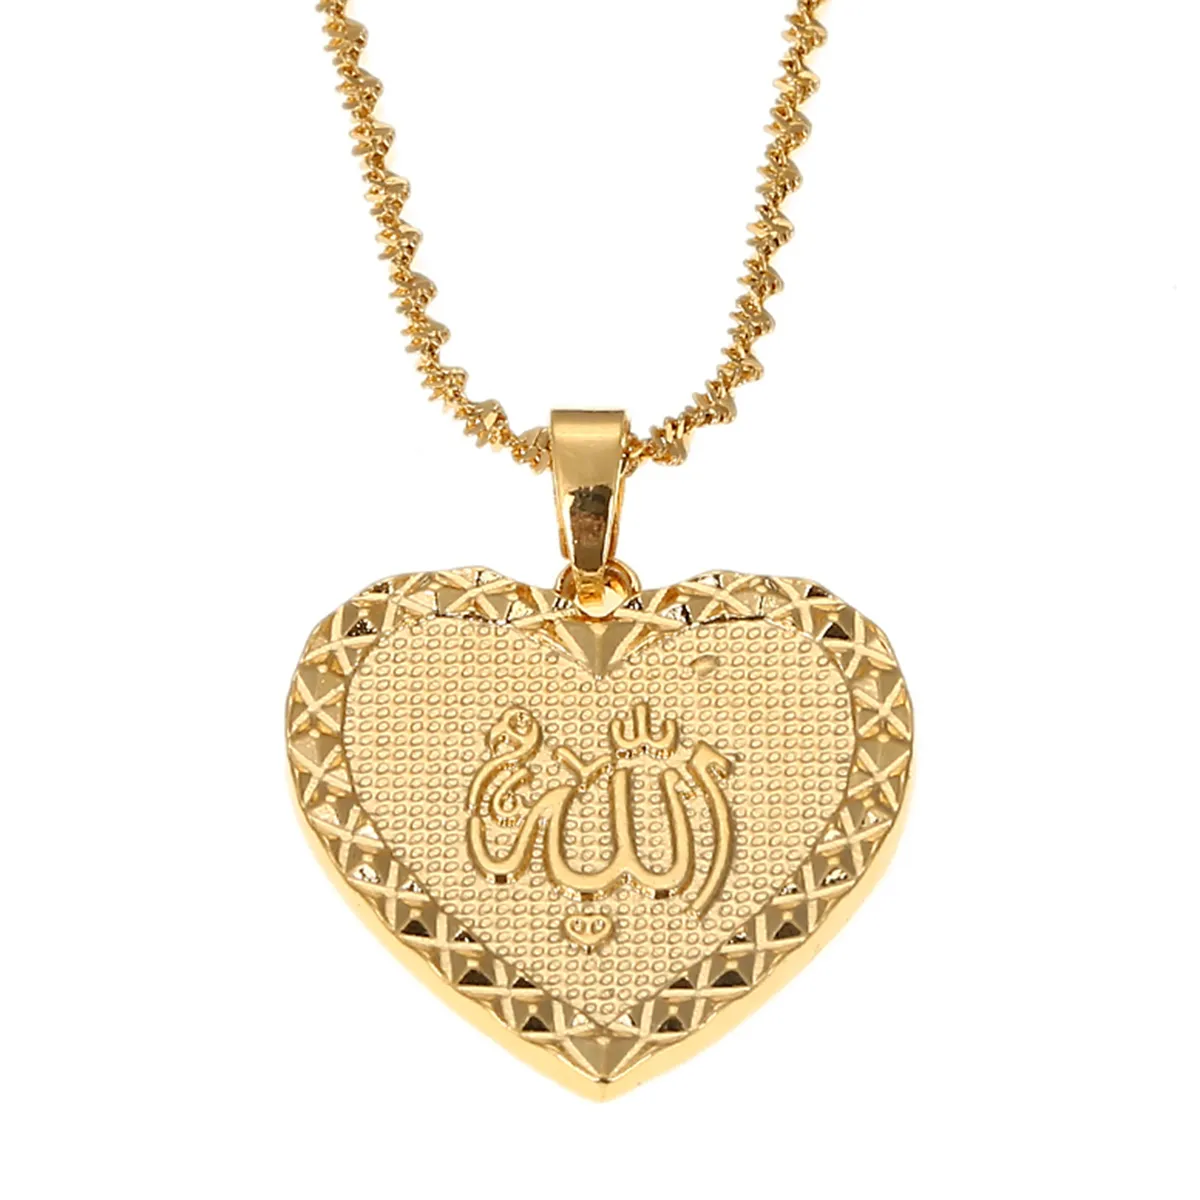 Islamic Necklace With Allah Pendant Heart Shaped Necklace Elegant Muslim Jewelry